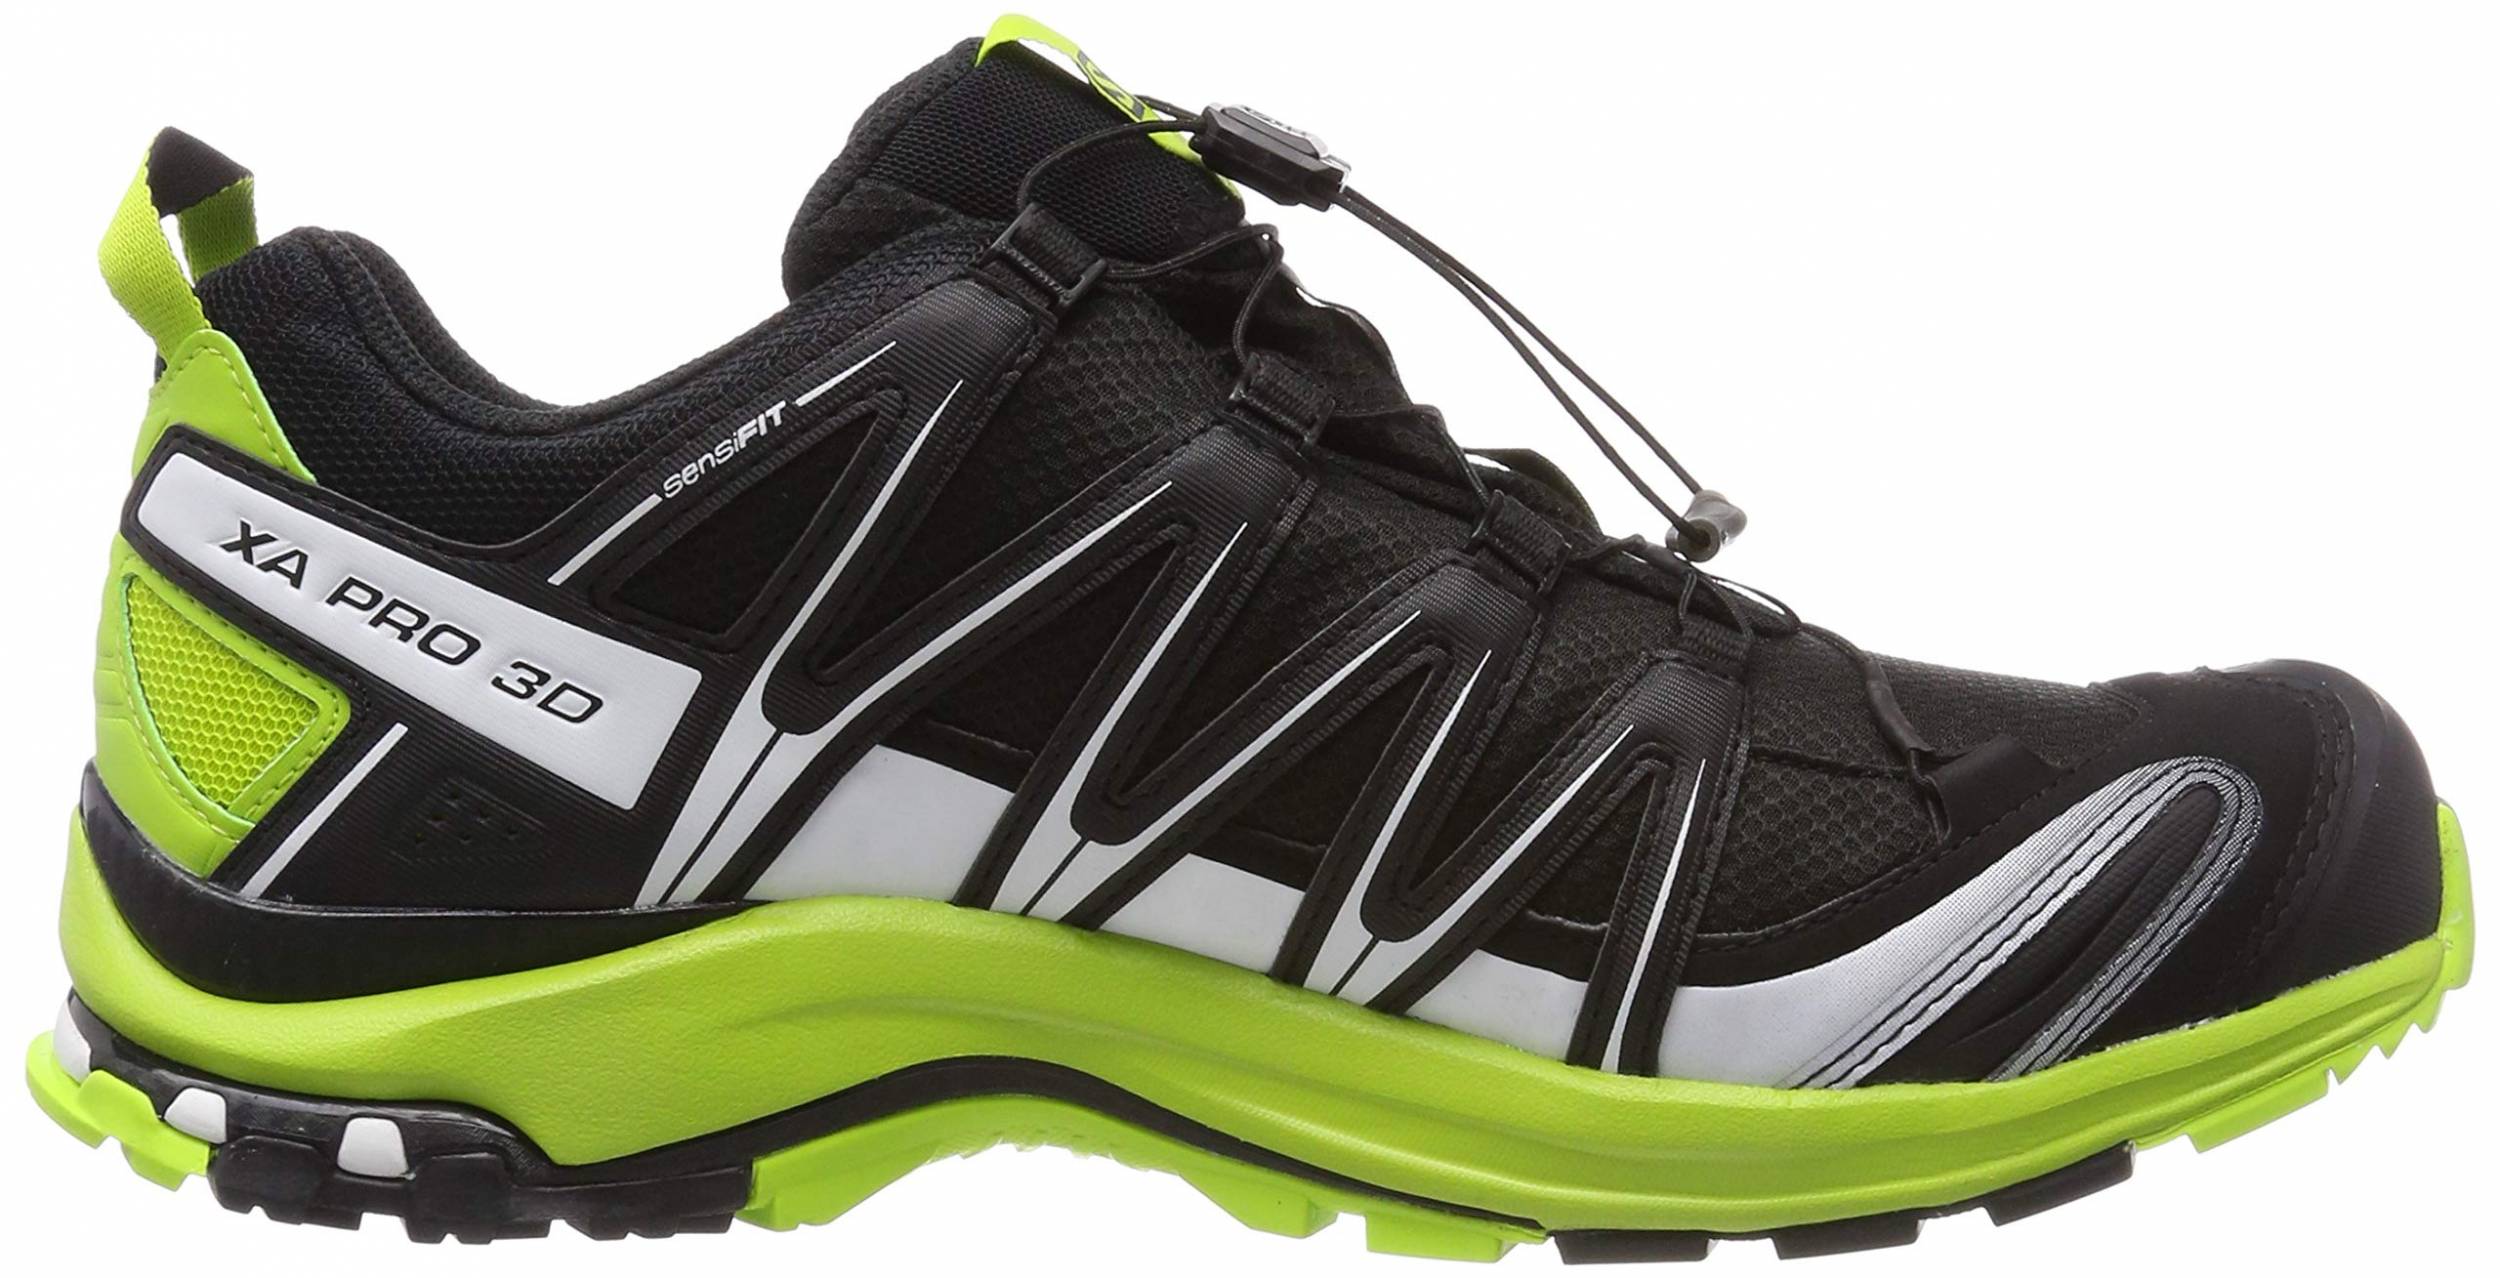 Save 31% on Waterproof Running Shoes 